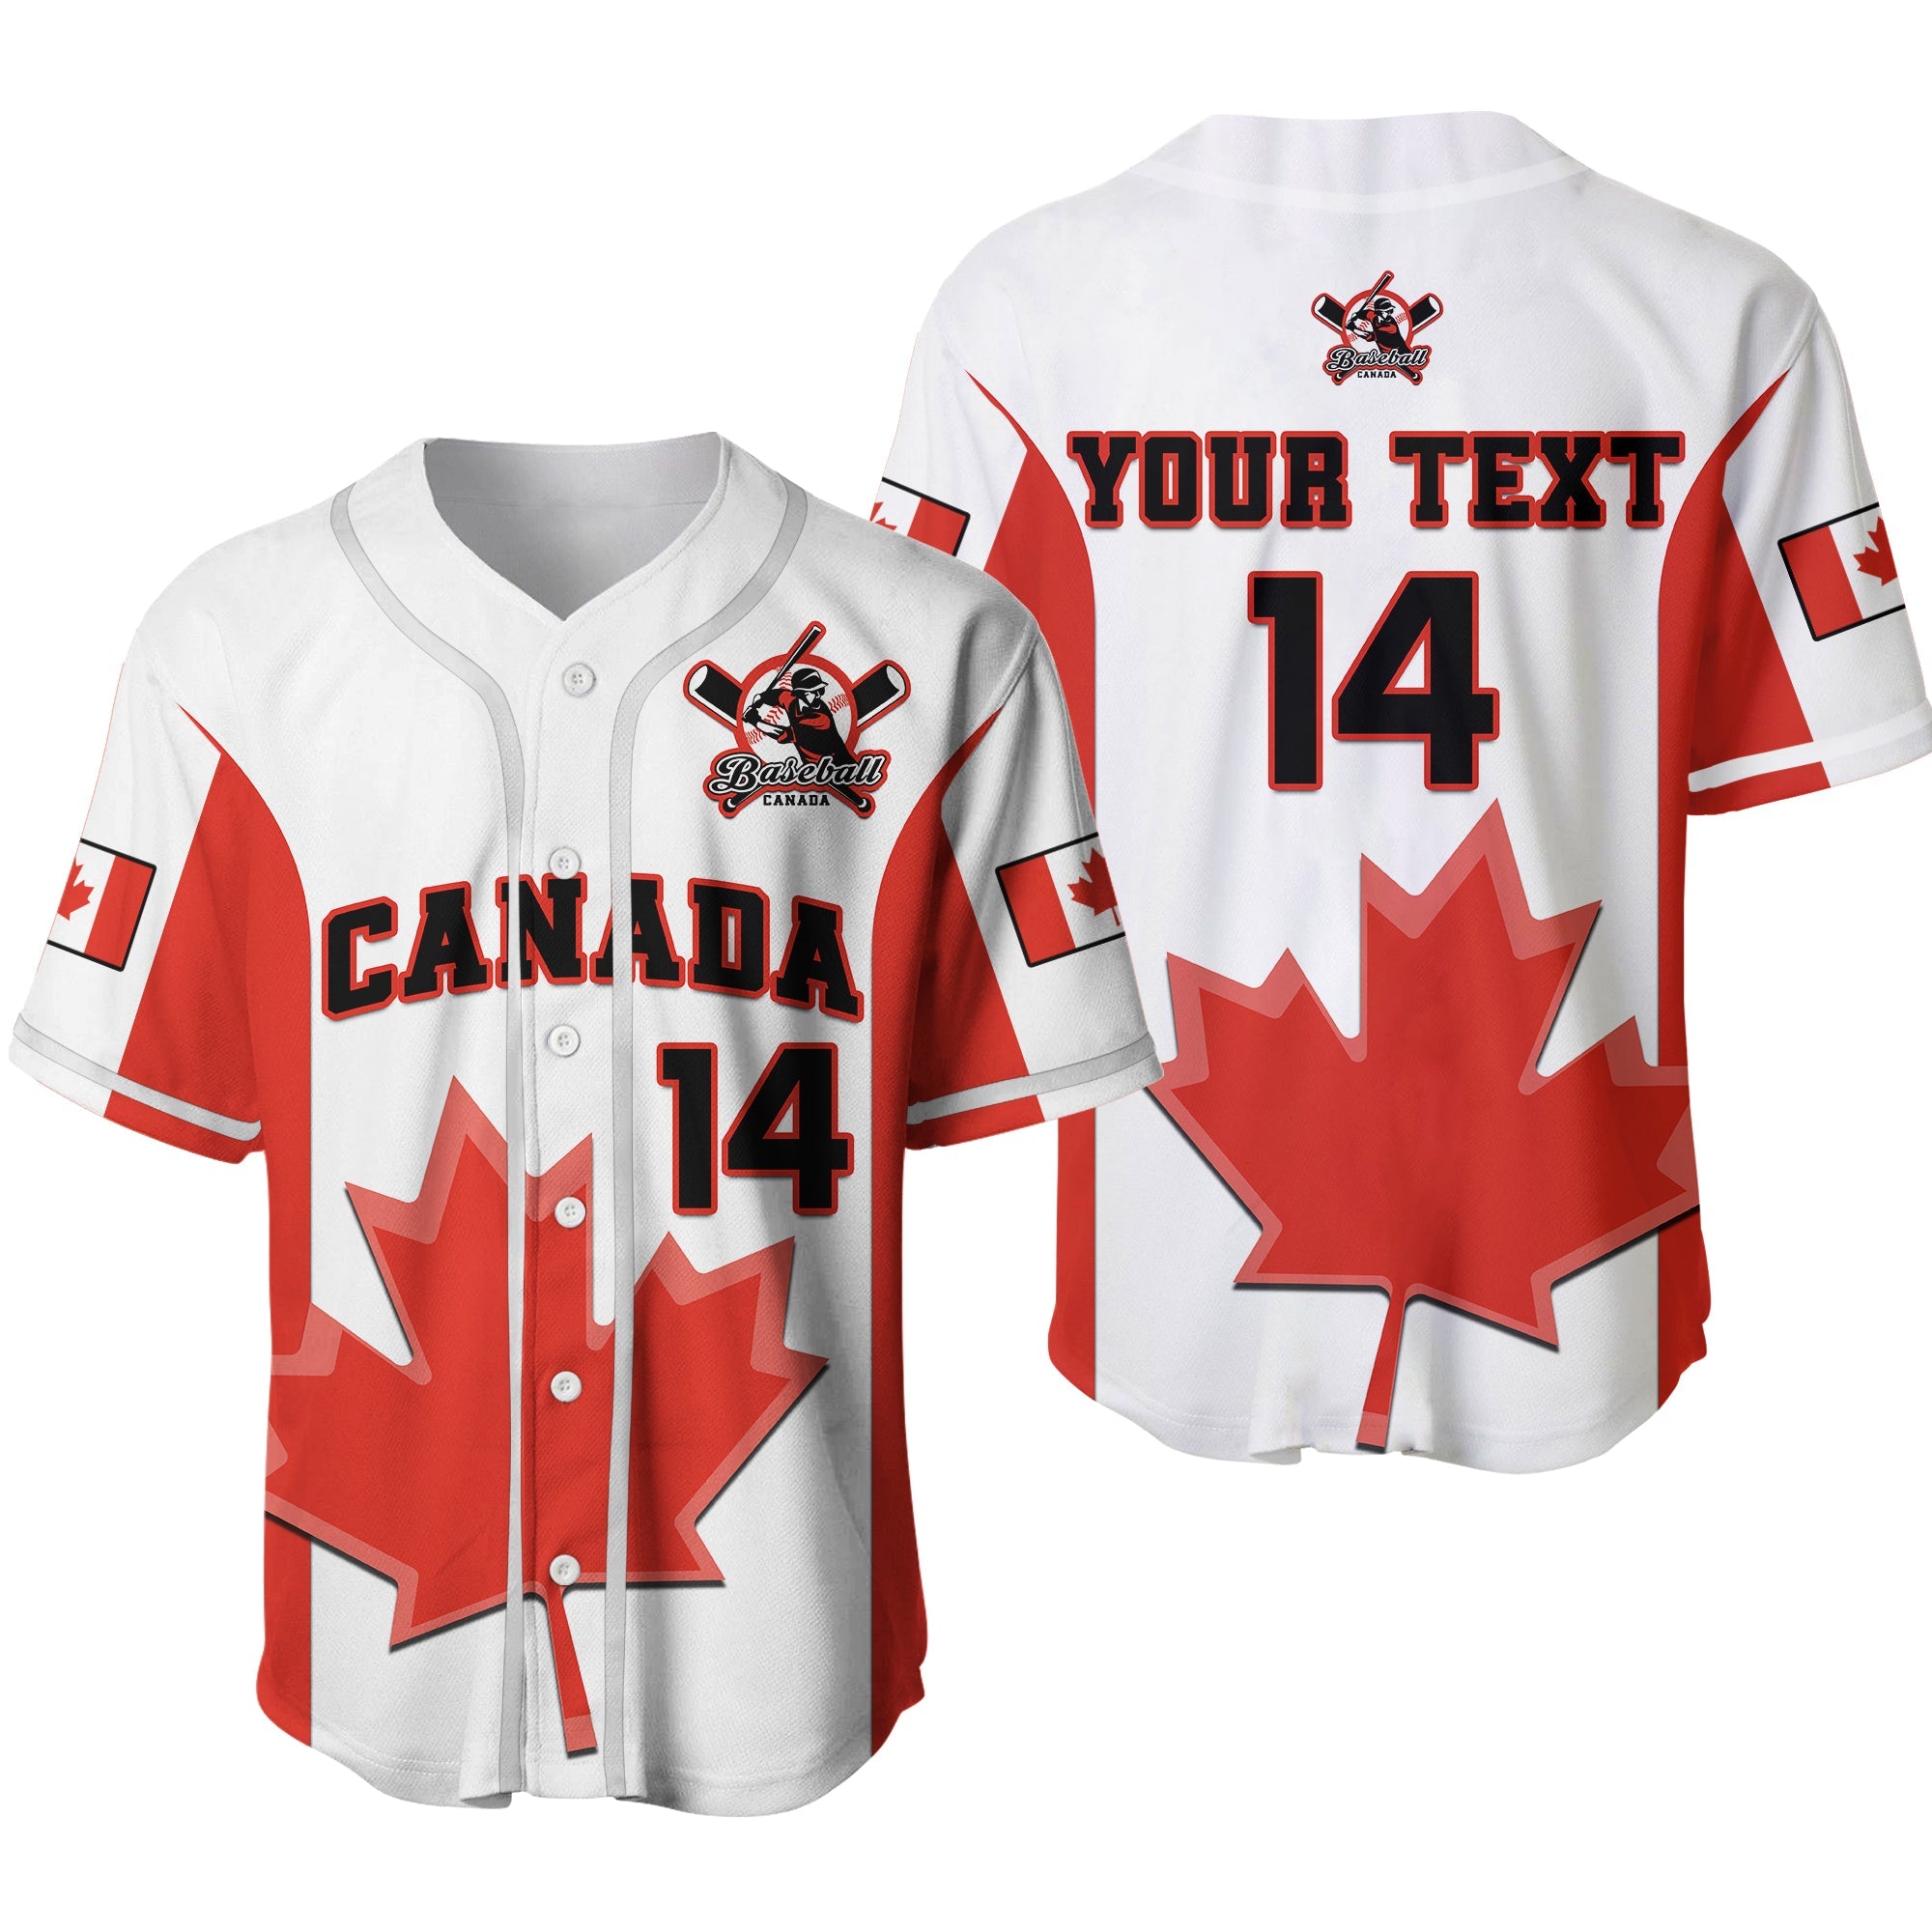 custom-text-and-number-canada-baseball-2023-baseball-jersey-canadian-maple-leaf-sporty-ver02